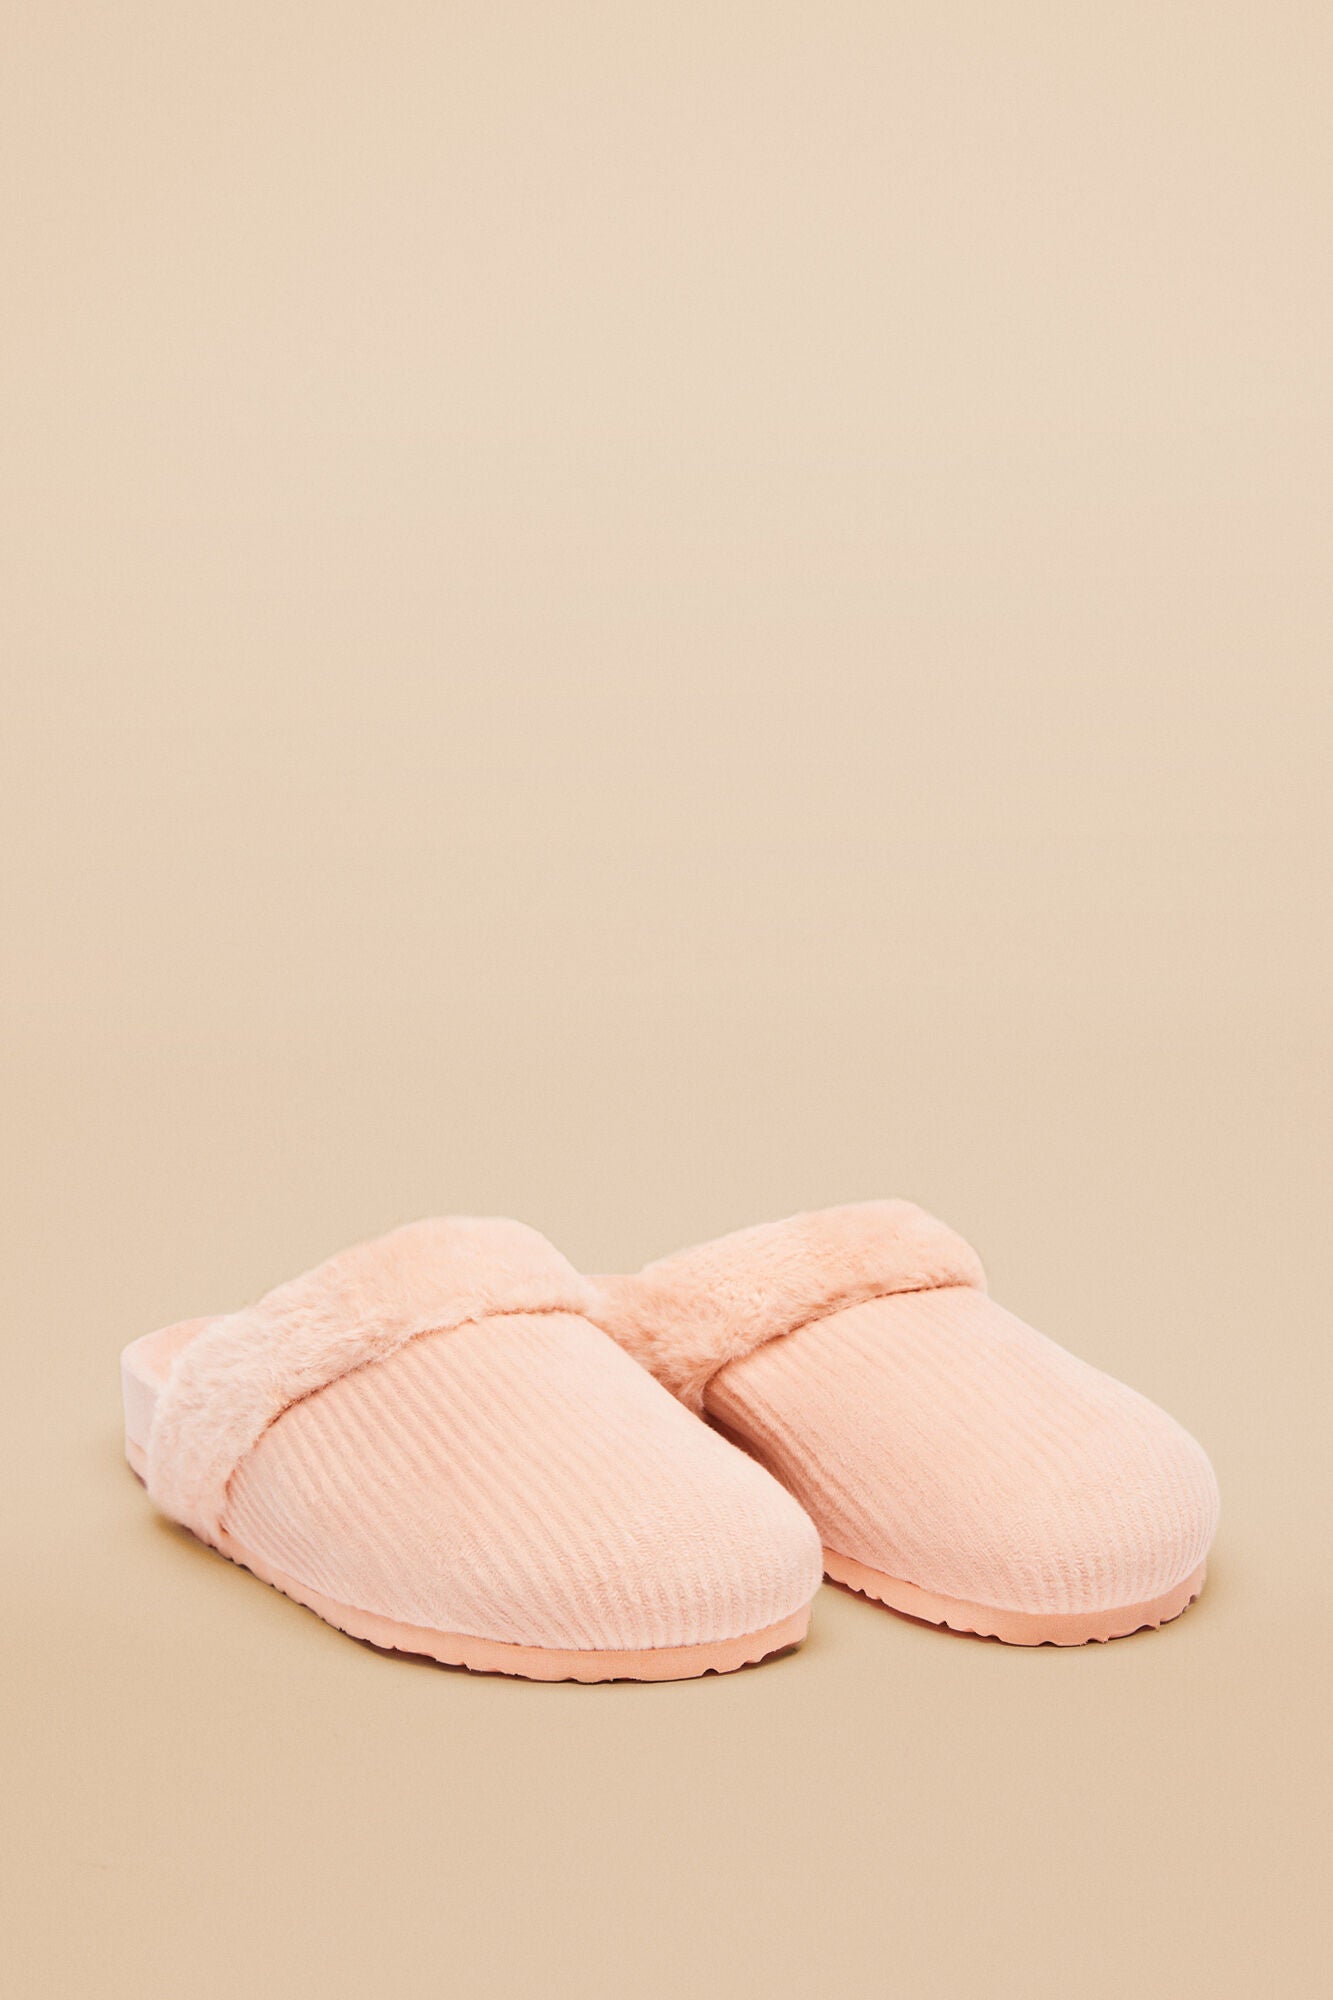 Slippers home corduroy pink clog